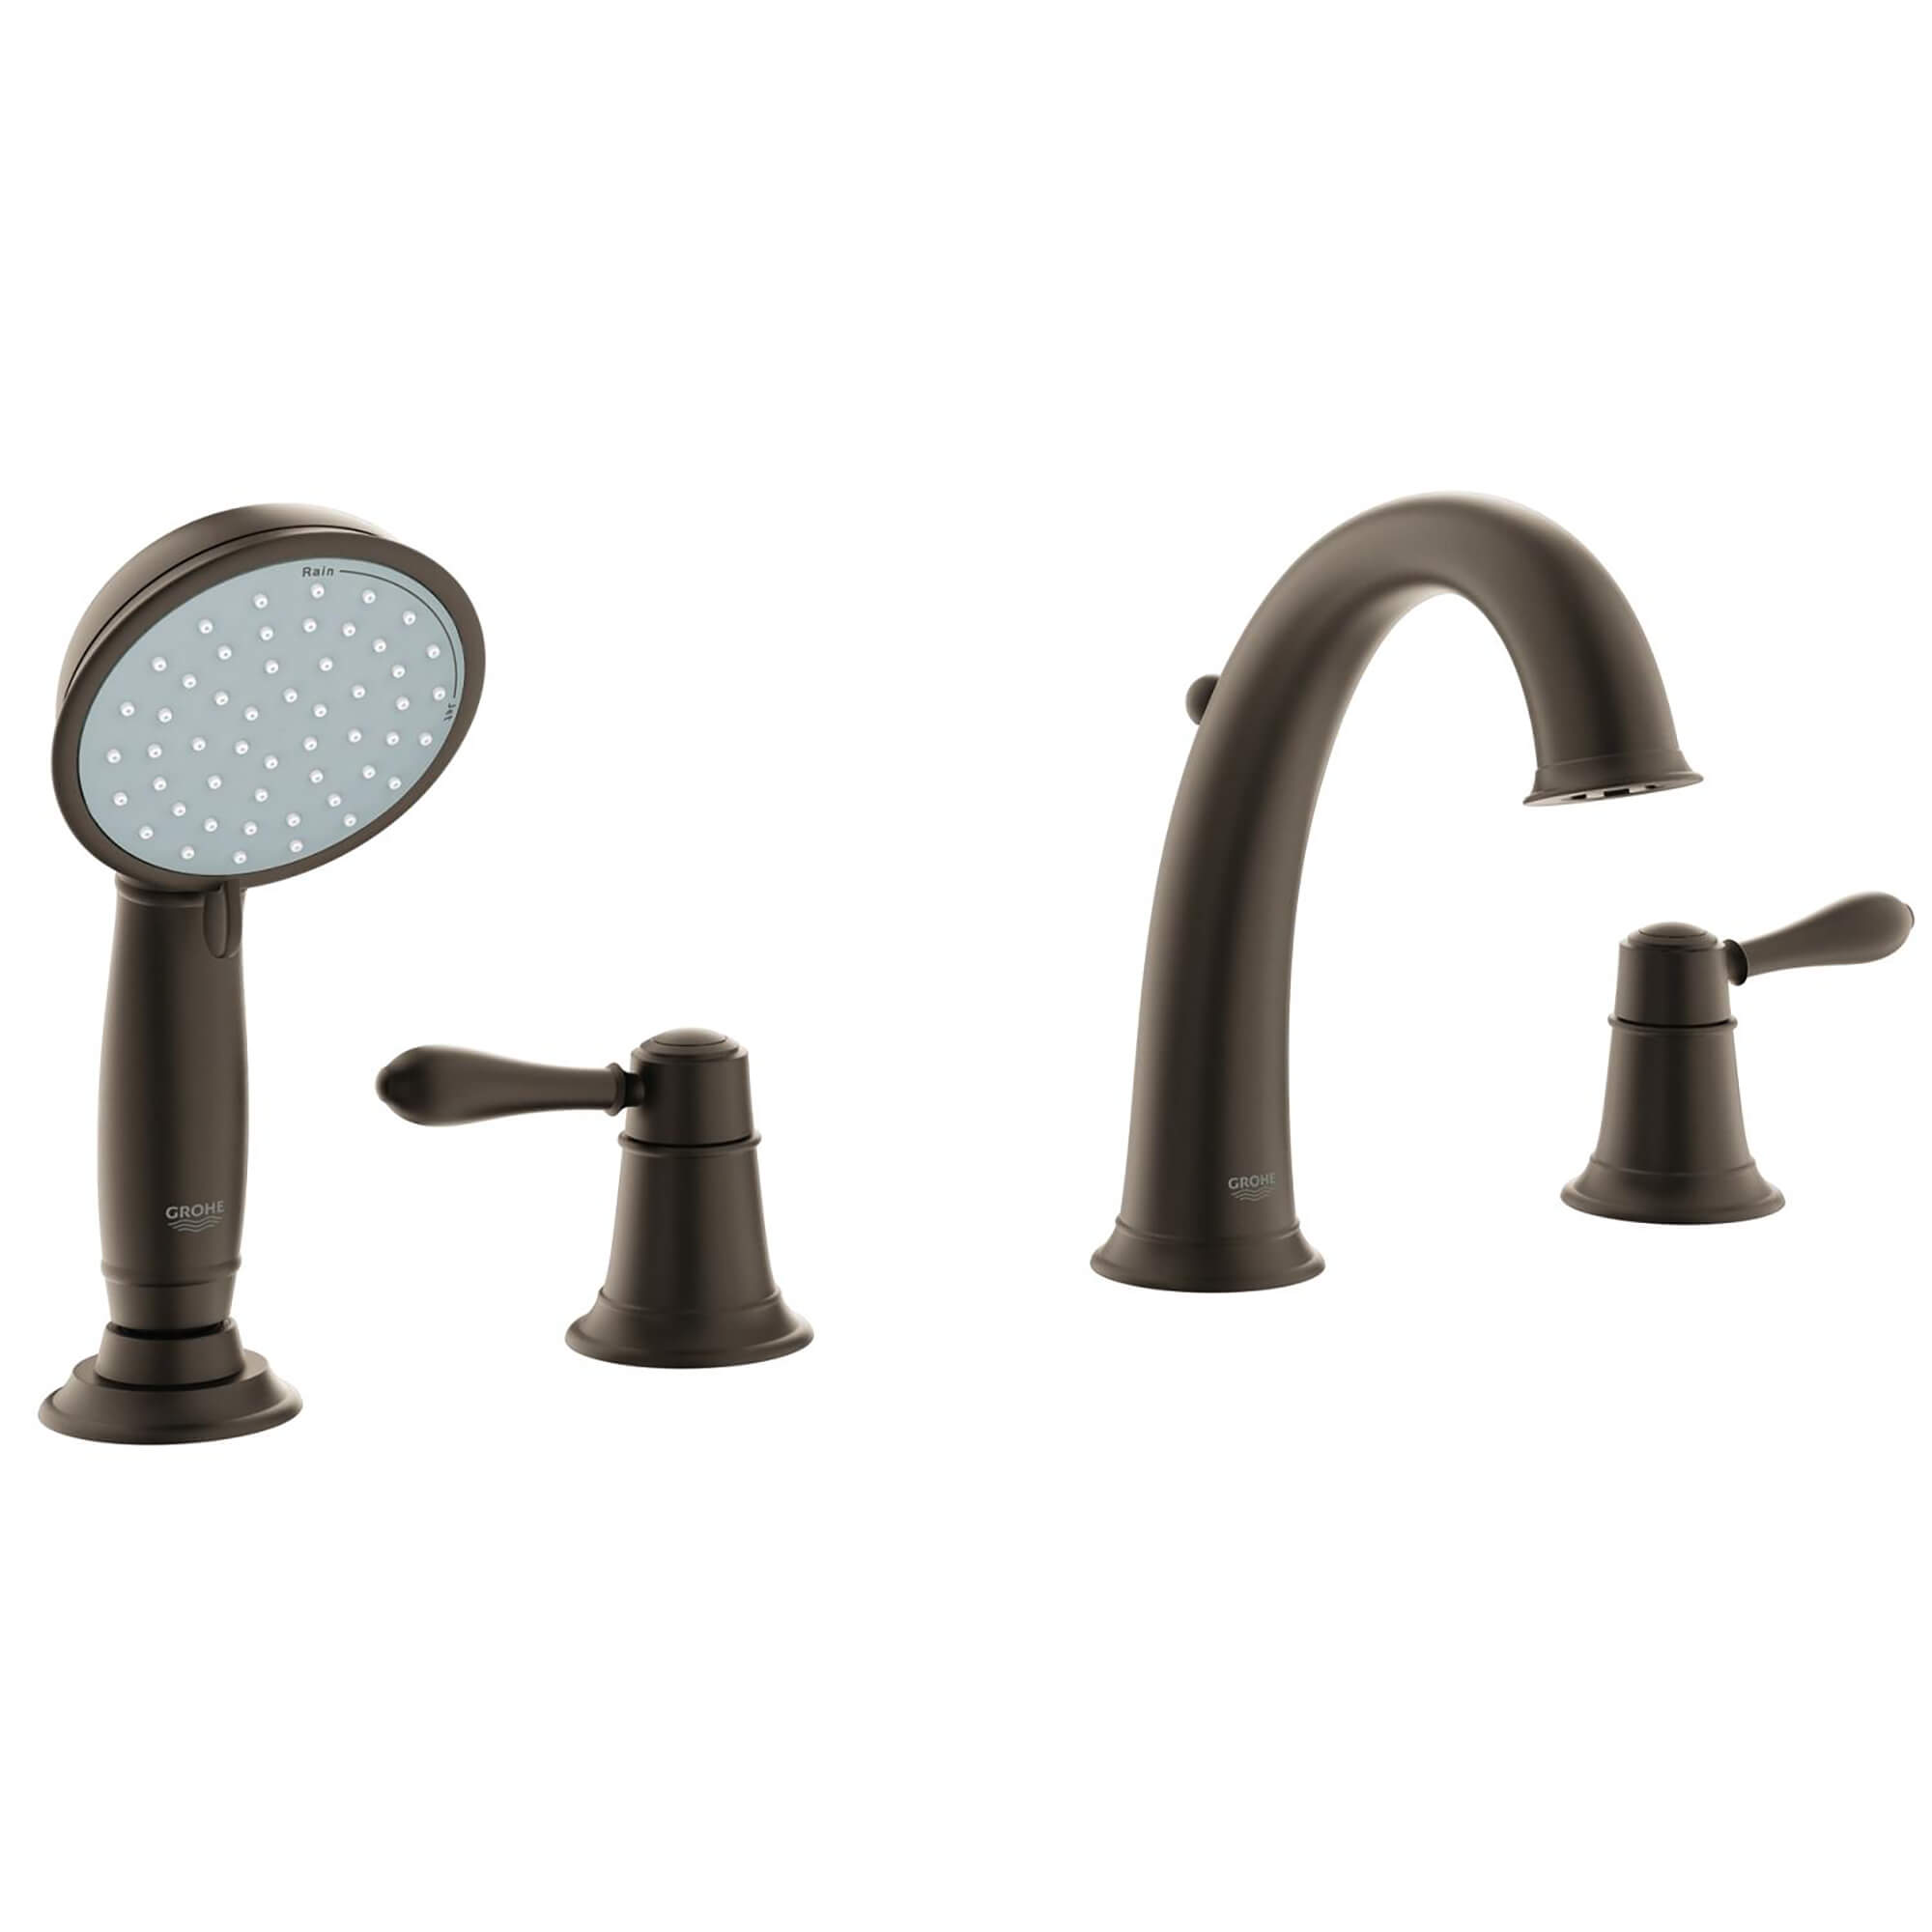 4-Hole 2-Handle Deck Mount Roman Tub Faucet with 2.0 GPM Hand Shower